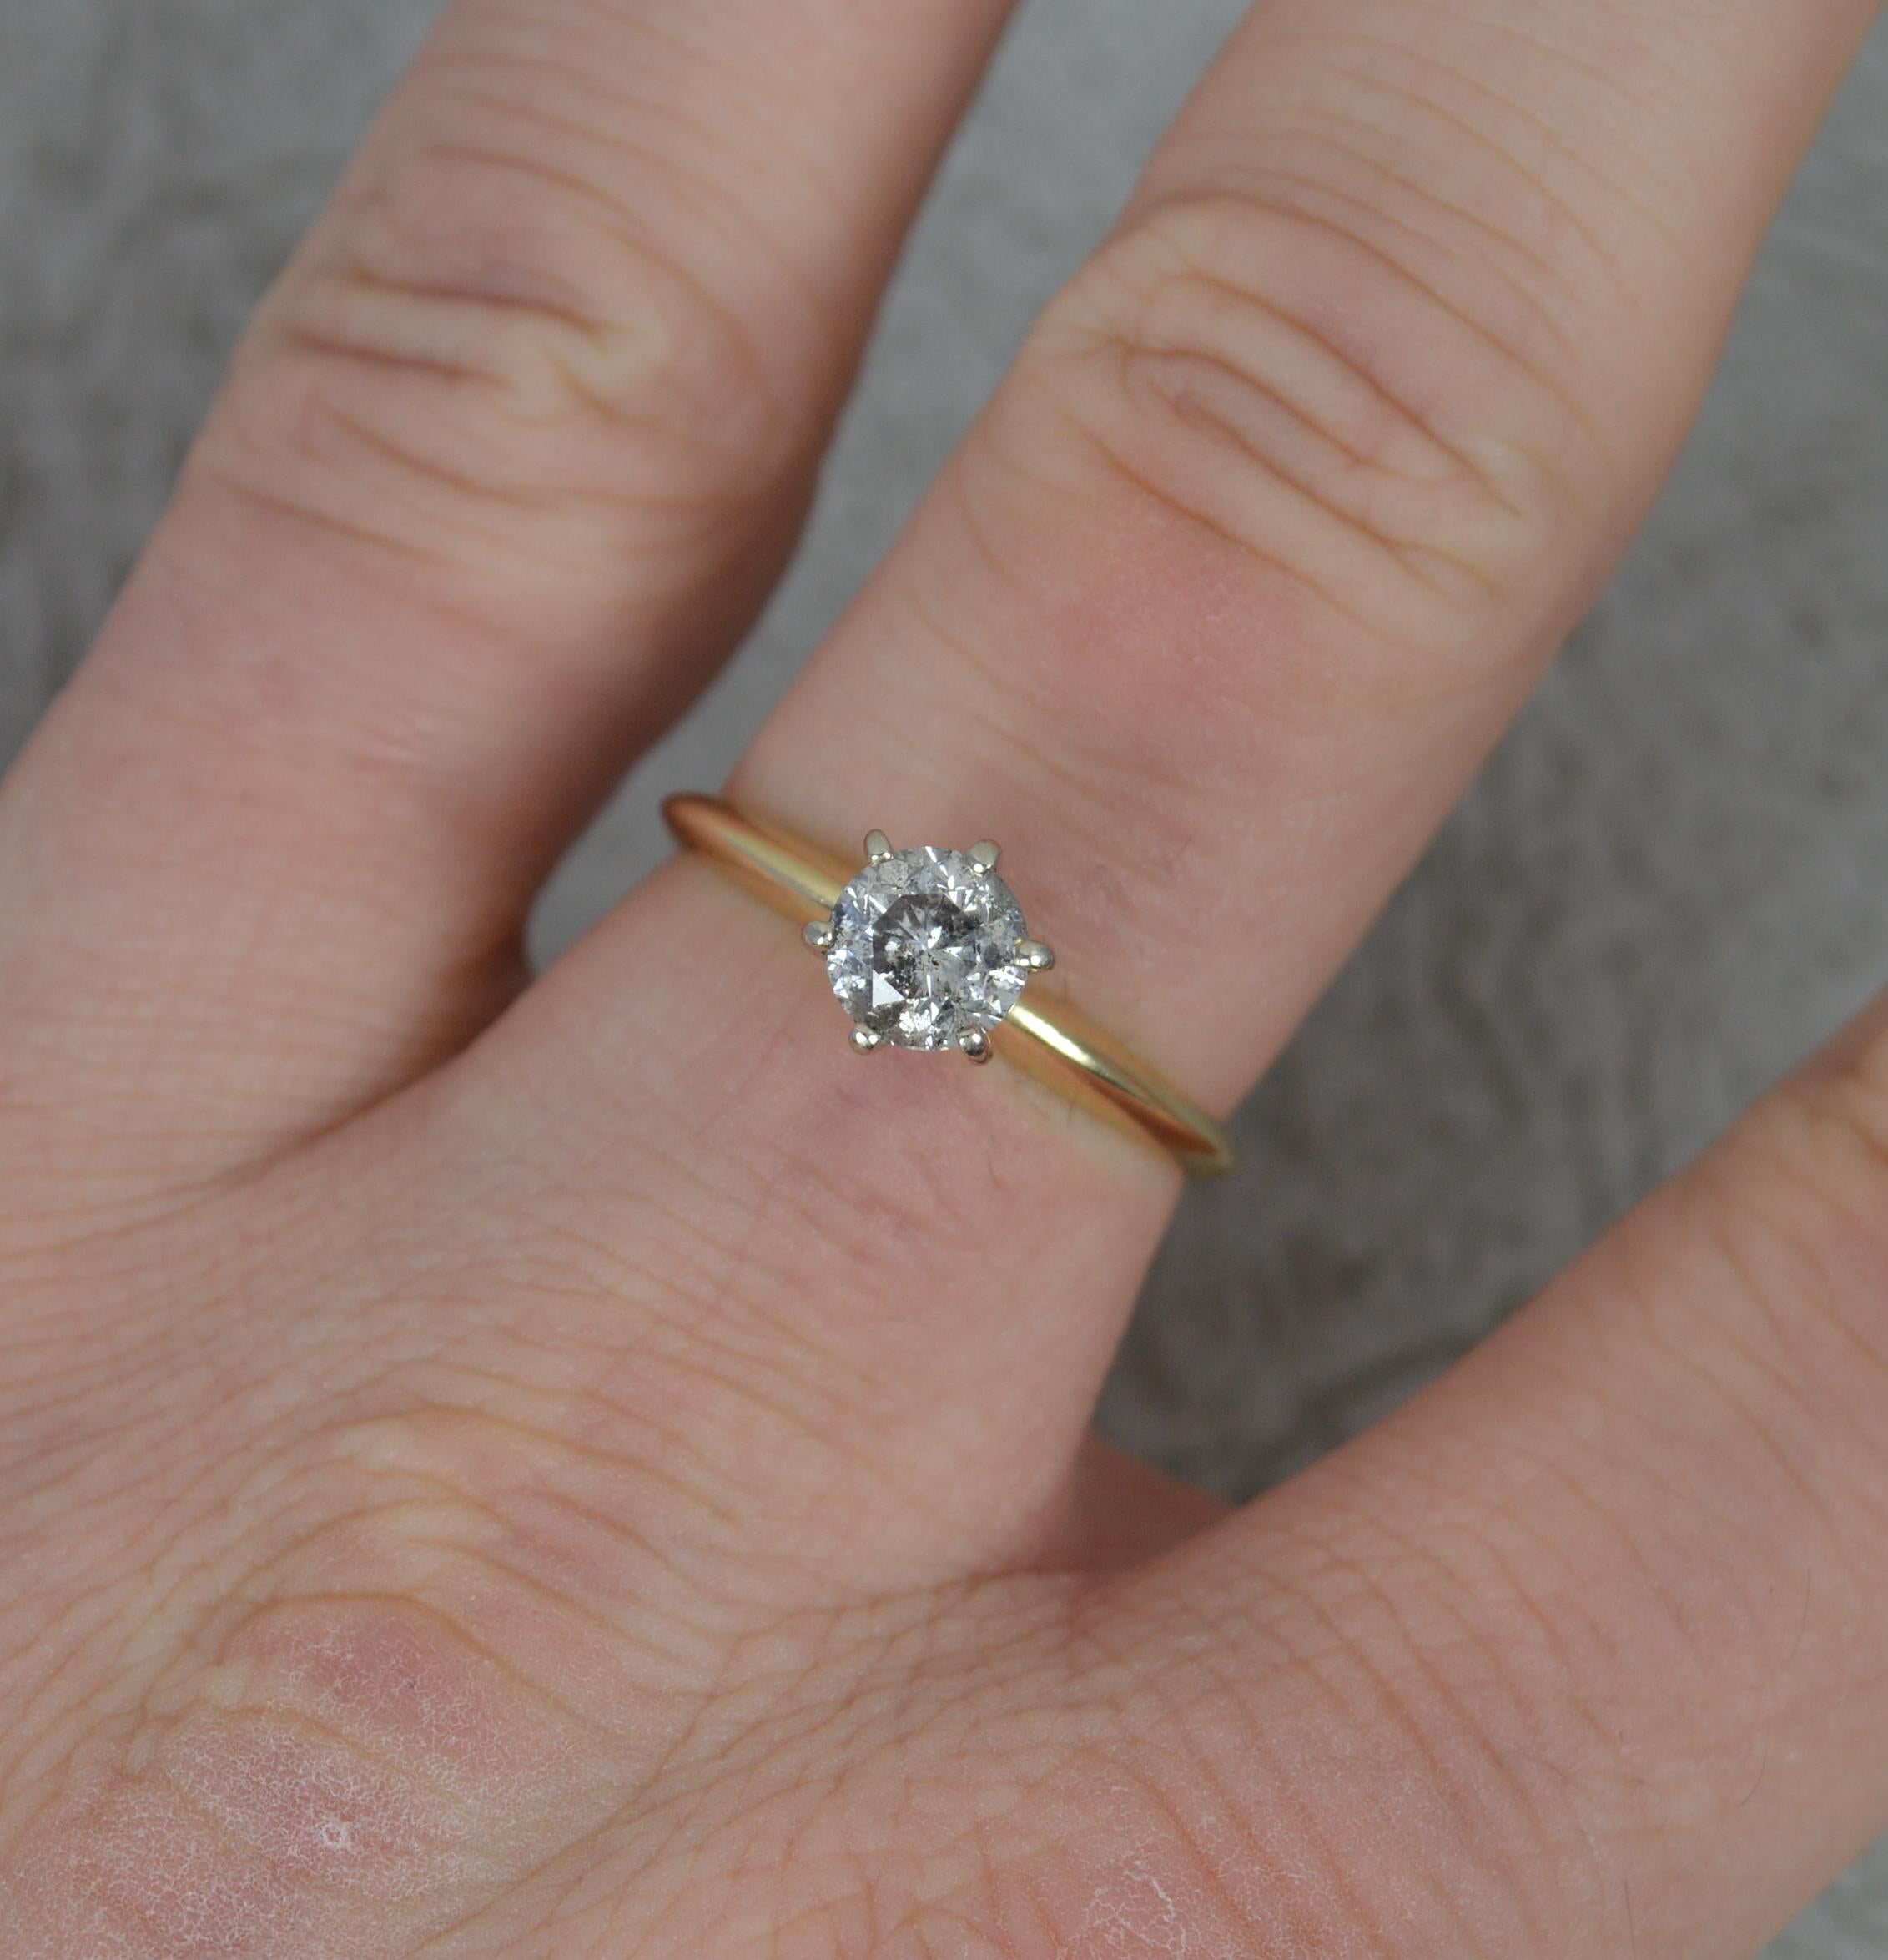 A wonderful diamond engagement ring.
Solid 14 carat yellow gold shank and six claw setting in white gold.
Set with a single, natural, round brilliant cut diamond. 5.7mm diameter, 0.7cts approx. Untreated. 
Known as a salt and pepper diamond, natural